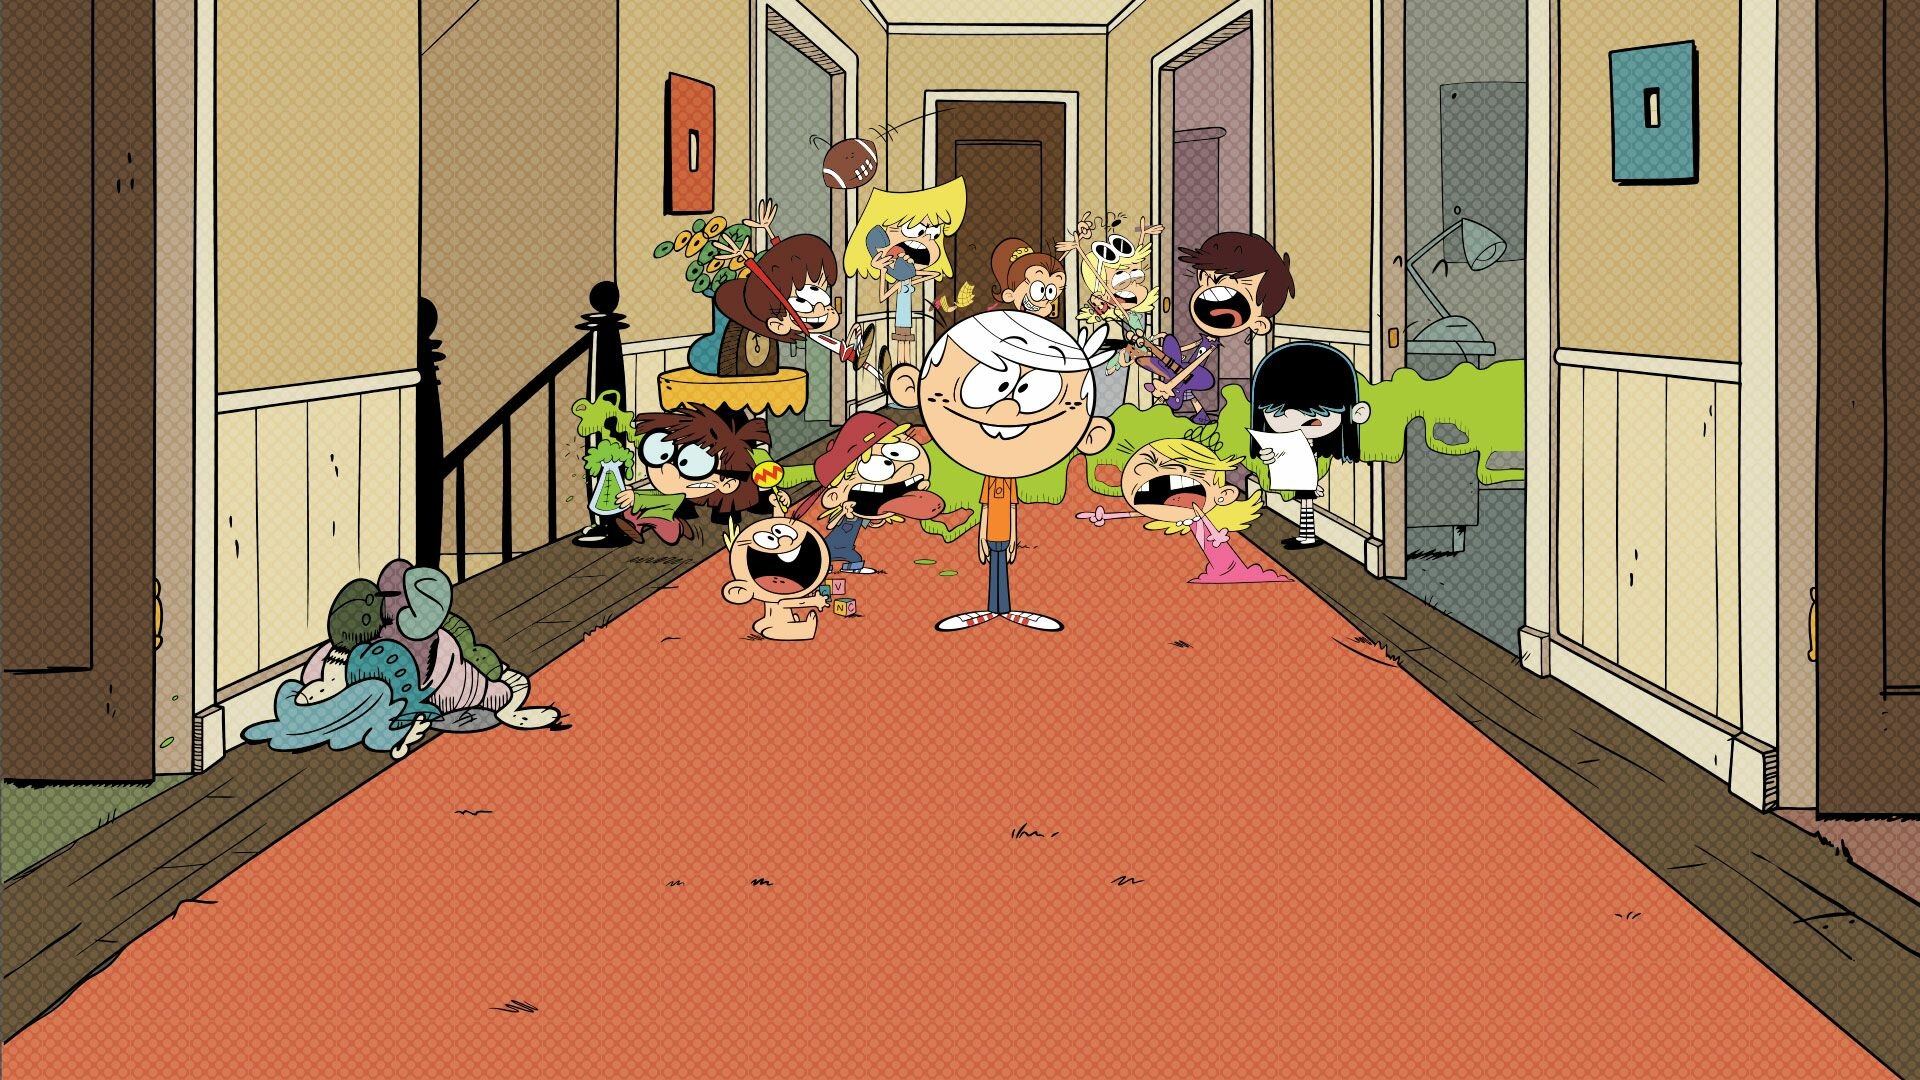 The Loud House New Series